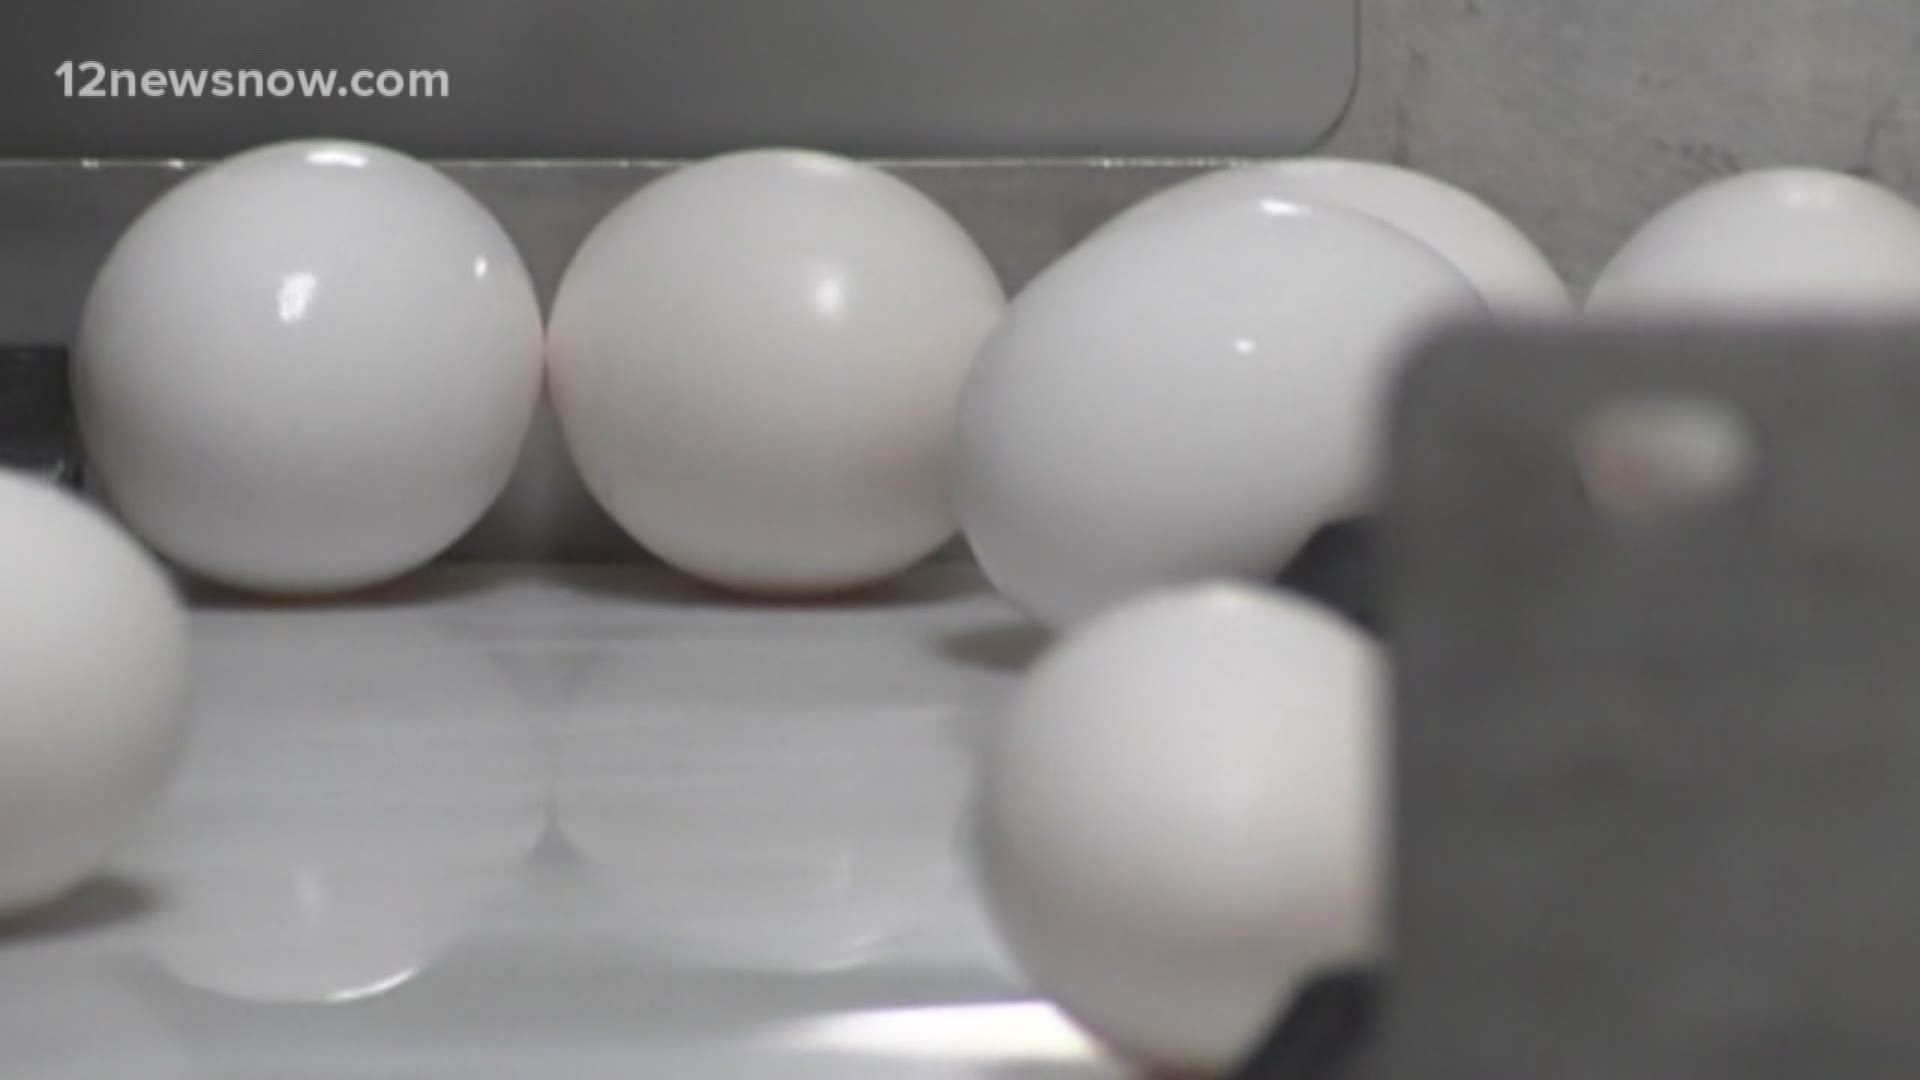 Health officials are investigating a listeria outbreak linked to hard boiled eggs. One person has already died in Texas as of Thursday, Dec. 19.